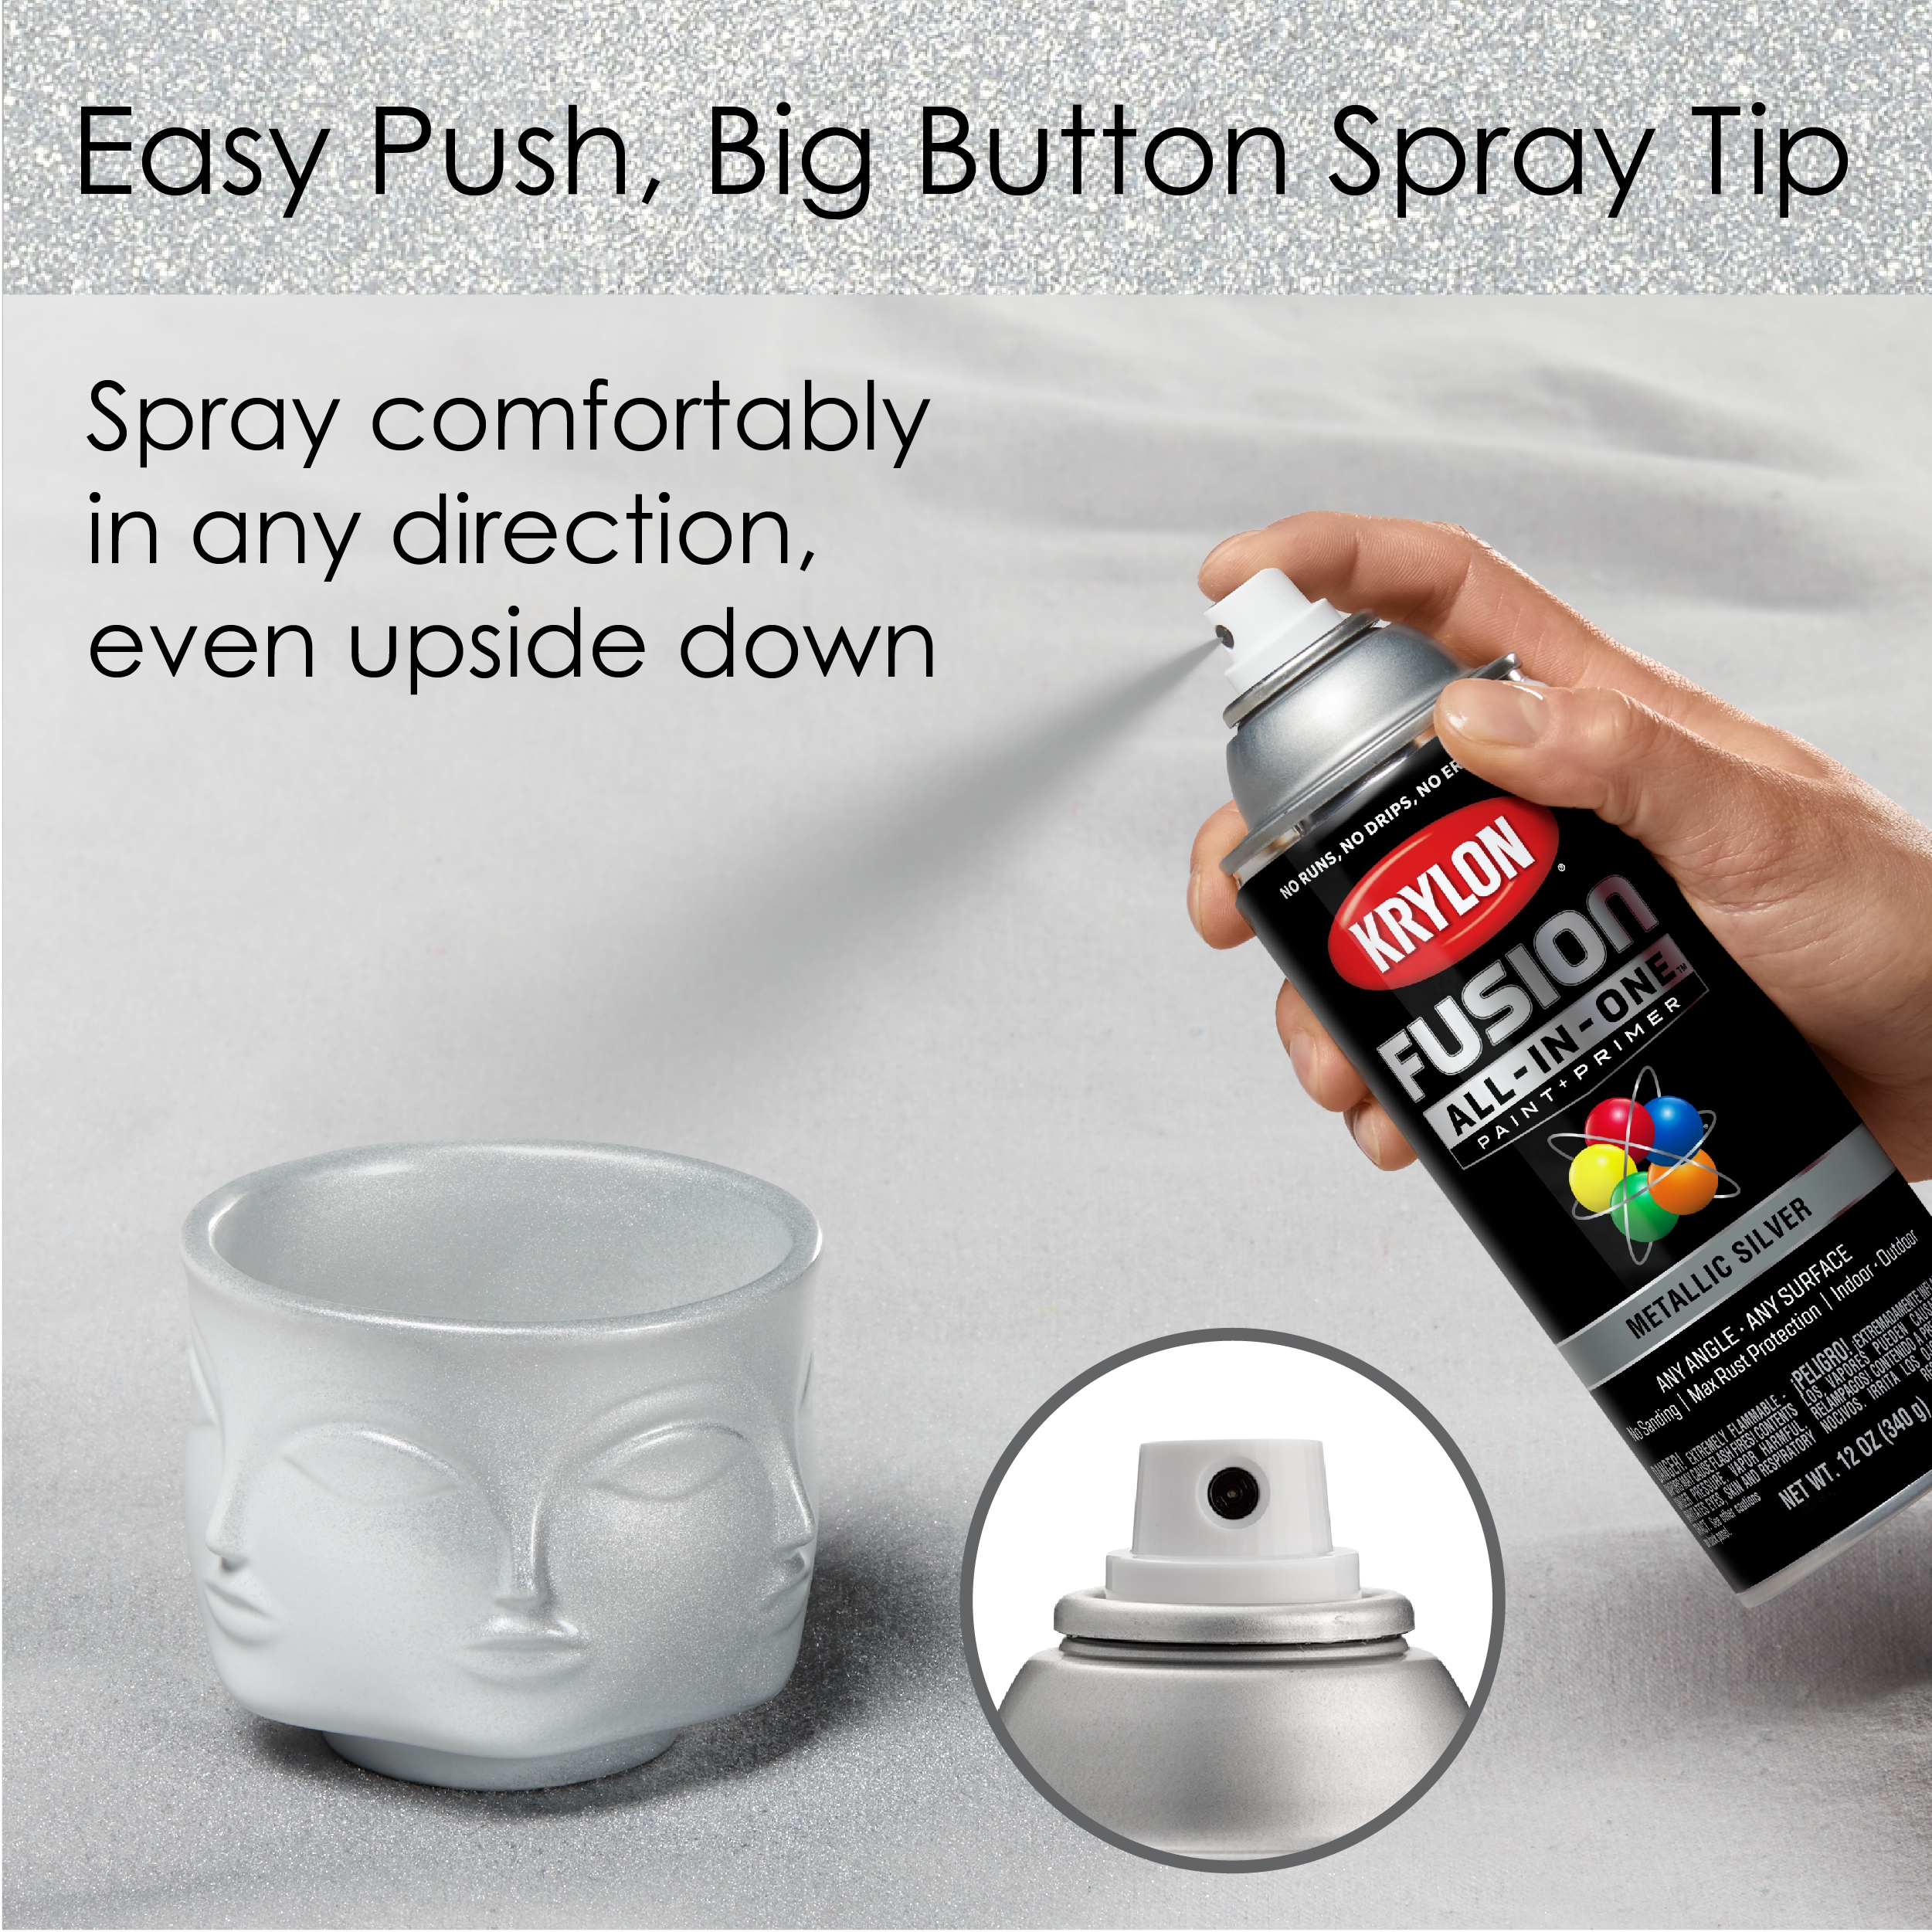 Tips to Use Silver Spray Paint for Metal Surfaces, by Trywonderx